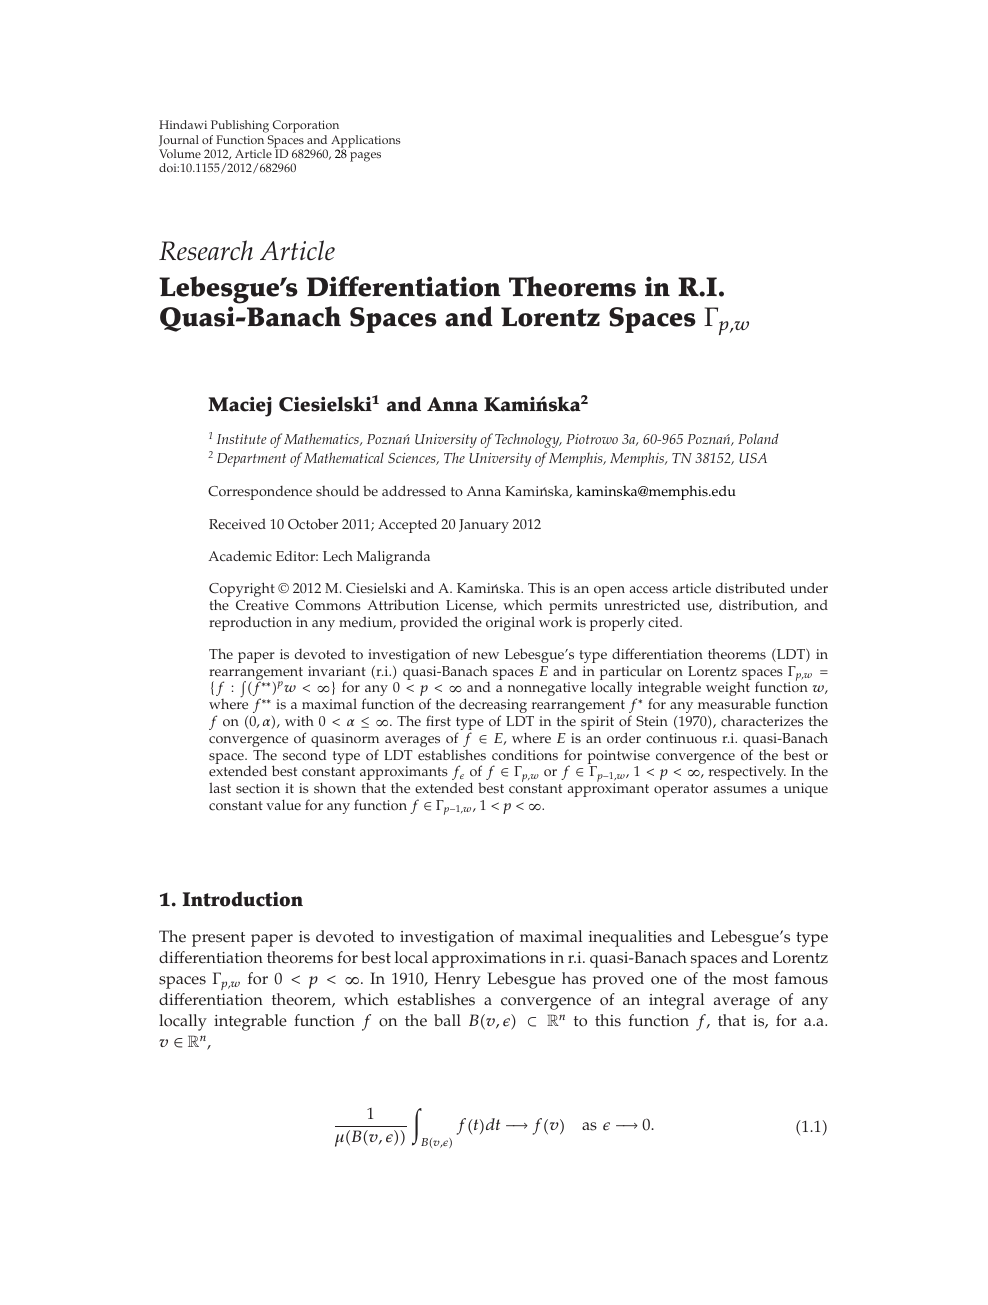 Lebesgue S Differentiation Theorems In R I Quasi Banach Spaces And Lorentz Spaces G P W Topic Of Research Paper In Mathematics Download Scholarly Article Pdf And Read For Free On Cyberleninka Open